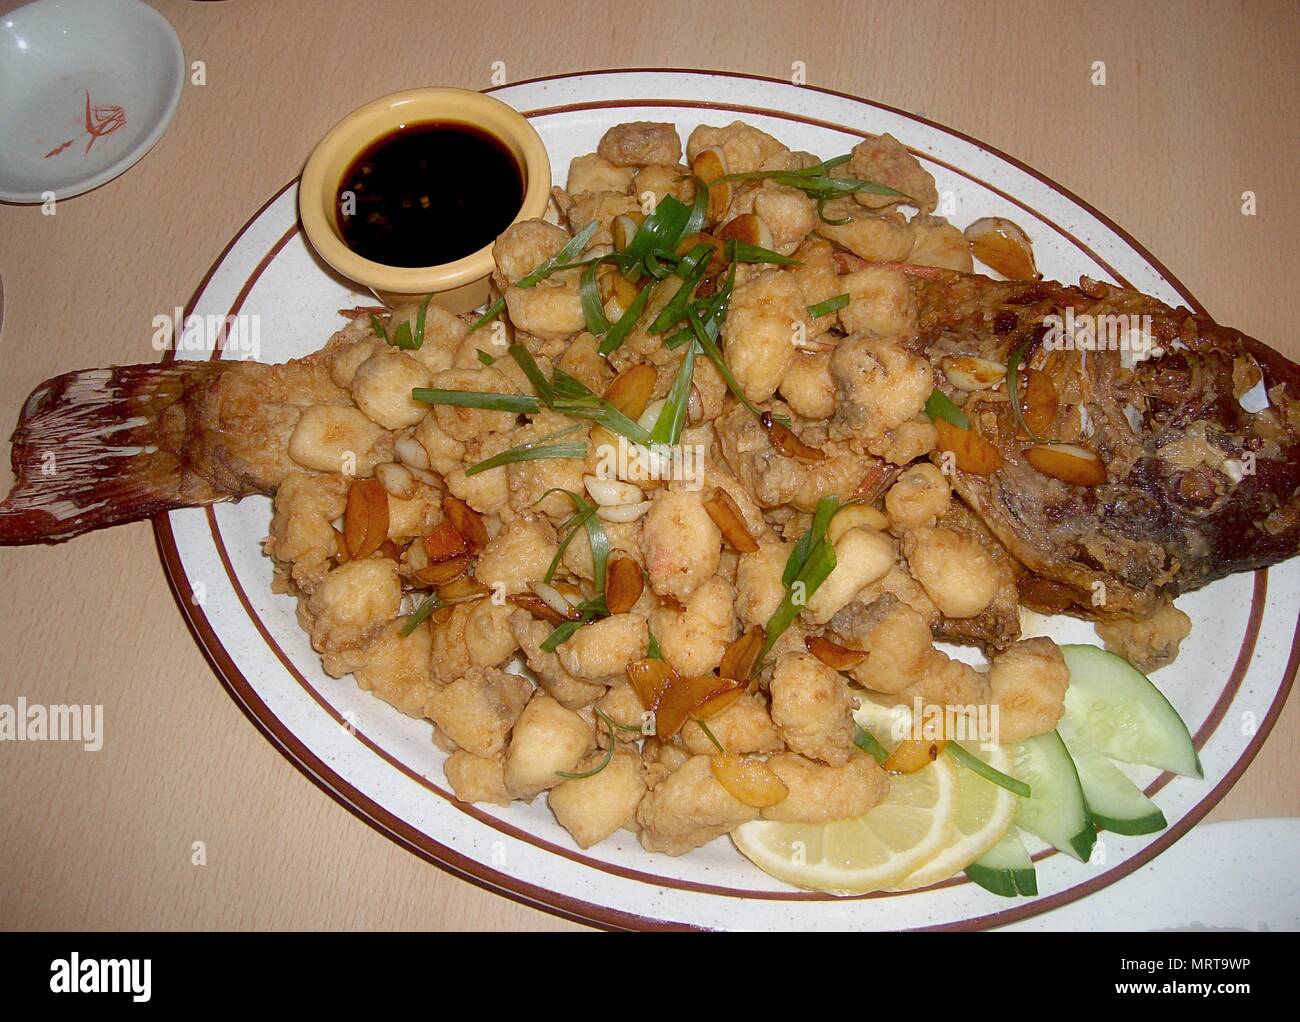 Fried fish cut into bite sizes and garnished with garlic and onions and assembled again in the plate to represent the whole fish. Stock Photo